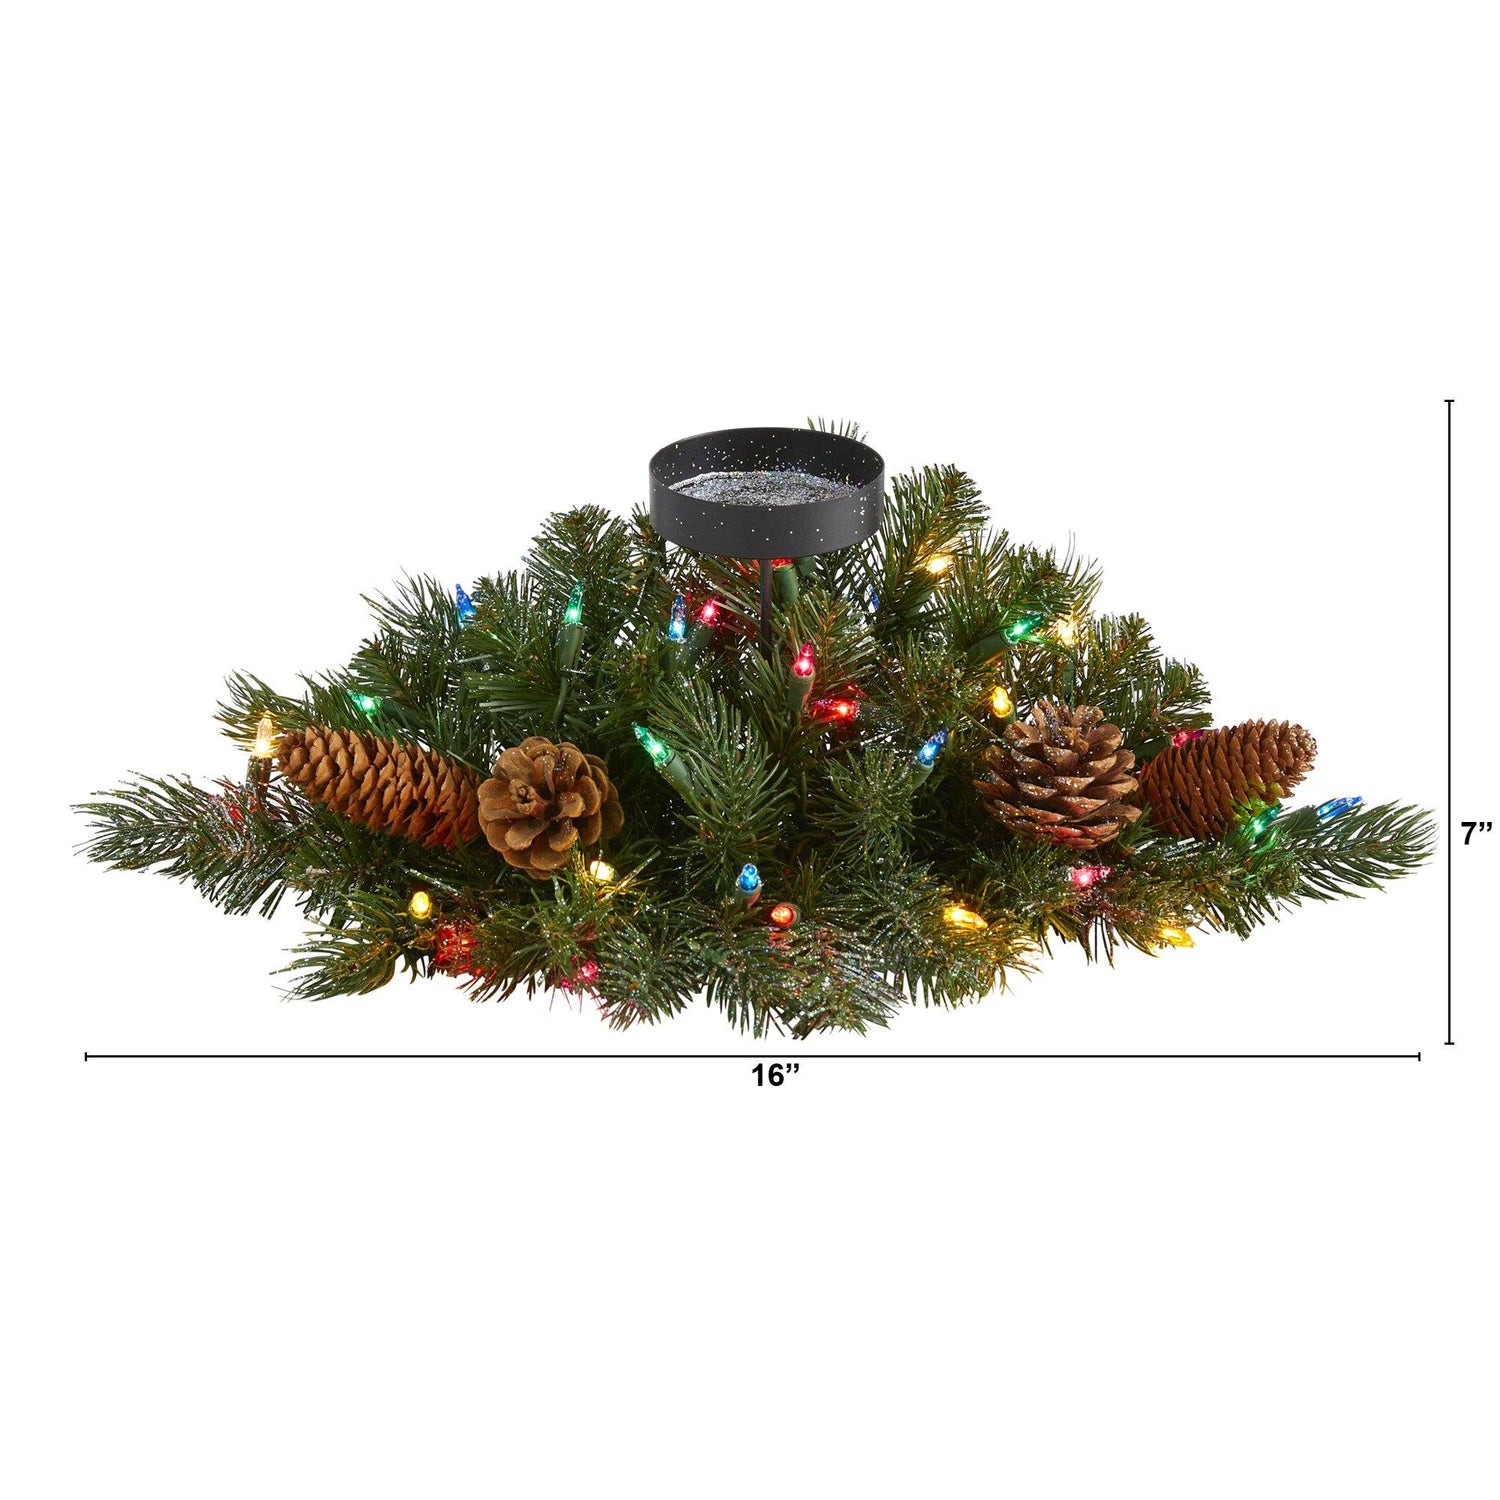 16” Flocked and Glittered Artificial Christmas Pine Candelabrum with 35 Multicolored Lights and Pine Cones